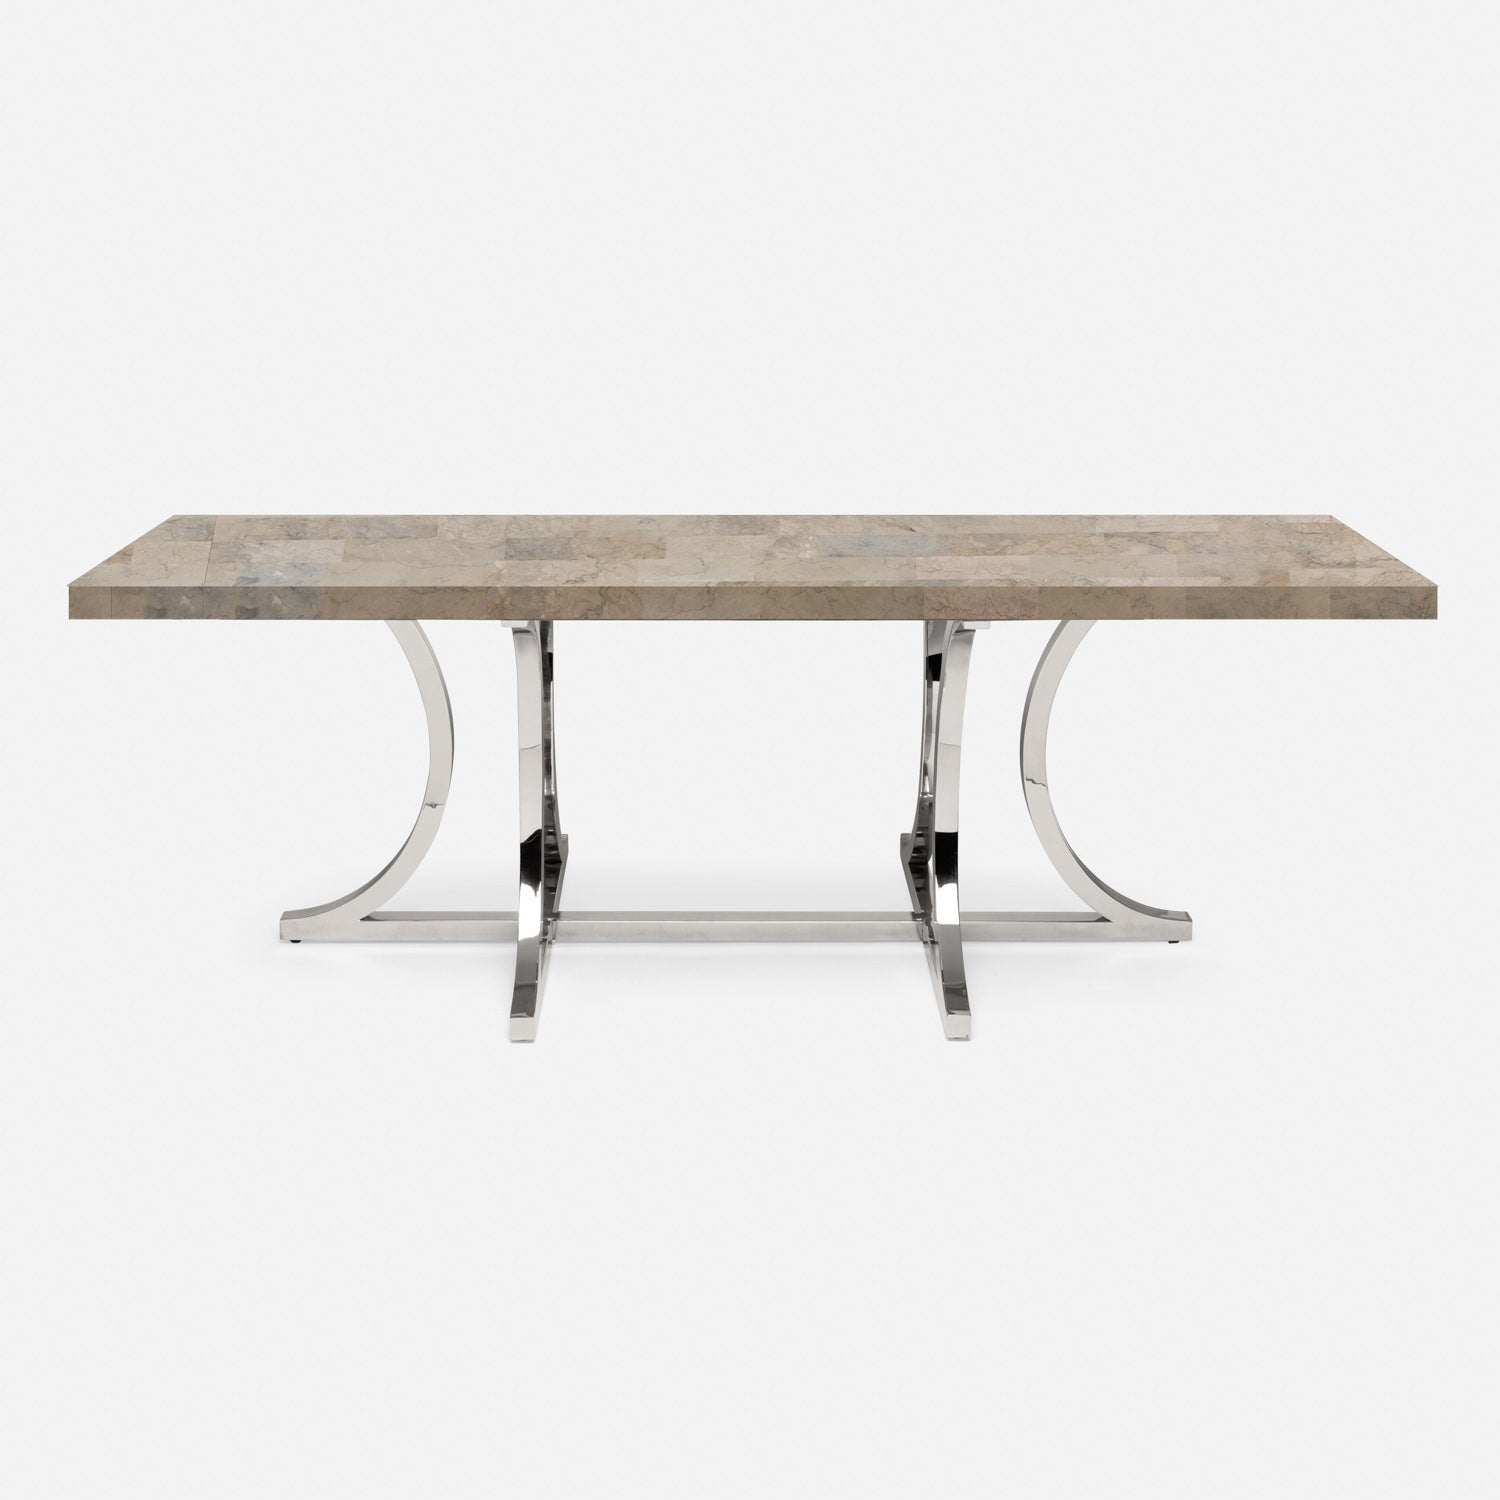 Made Goods Leighton 88" x 40" x 30" Polished Silver Steel Dinning Table With Rectangle Warm Gray Marble Table Top